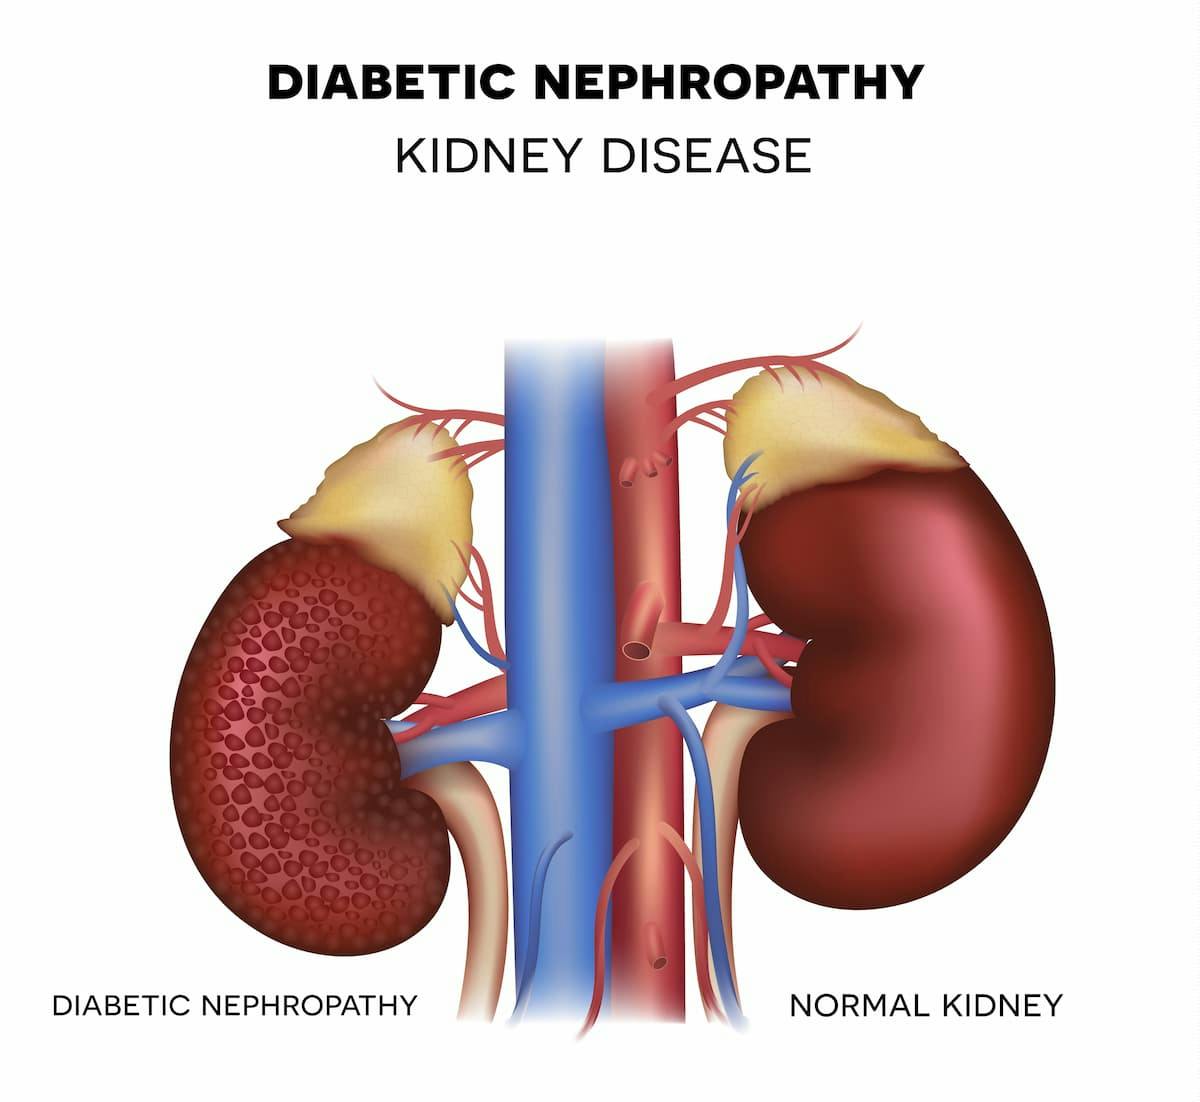 Renal Complications Drive Increase in Deaths Related to Vascular Complications in Adults with Diabetes